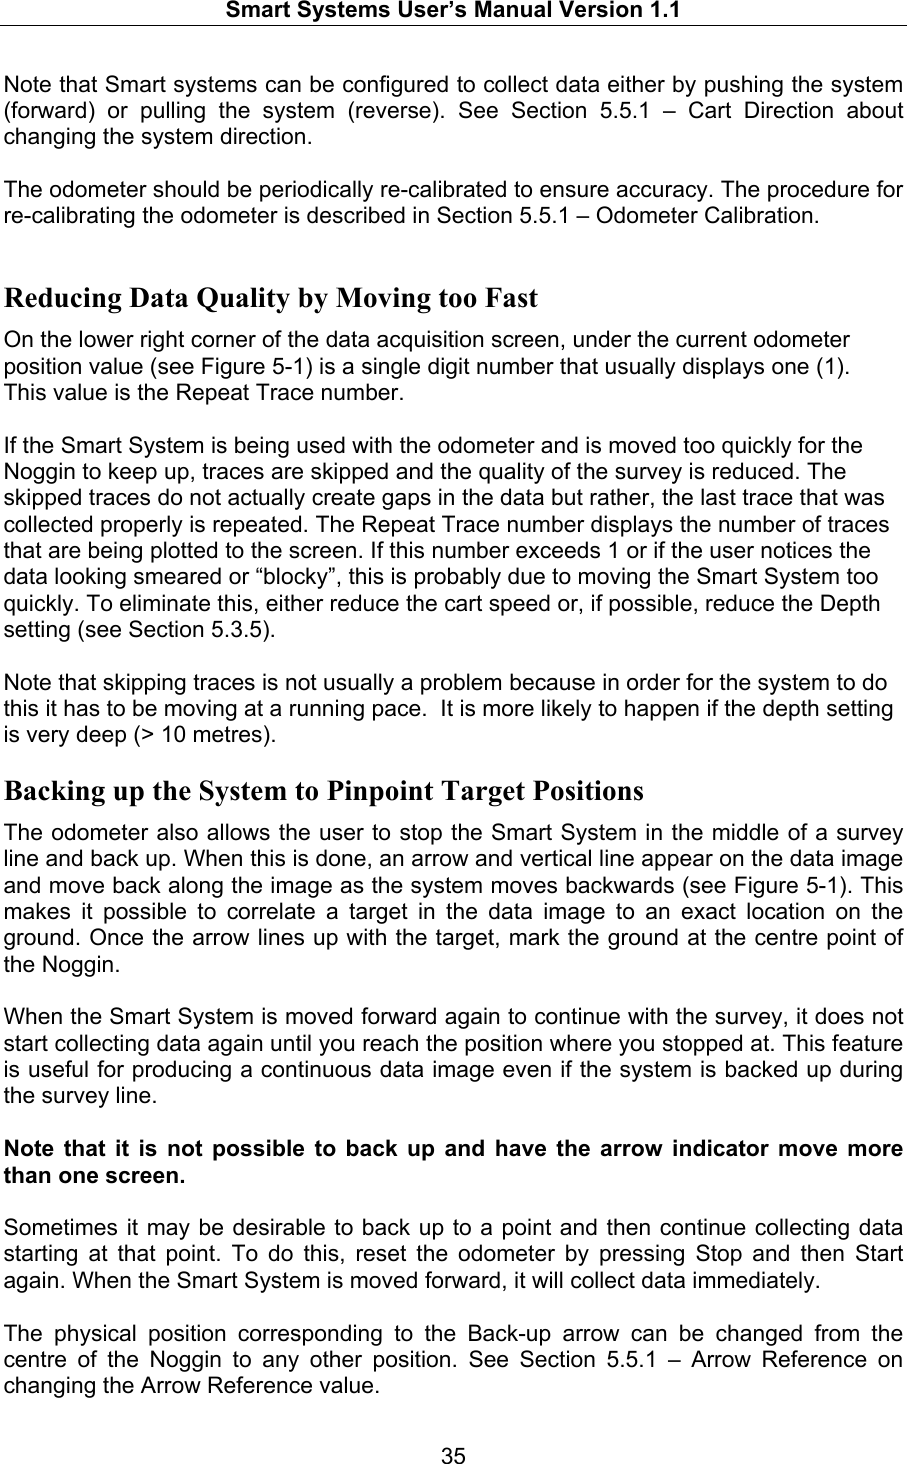   Smart Systems User’s Manual Version 1.1  35  Note that Smart systems can be configured to collect data either by pushing the system (forward) or pulling the system (reverse). See Section 5.5.1 – Cart Direction about changing the system direction.  The odometer should be periodically re-calibrated to ensure accuracy. The procedure for re-calibrating the odometer is described in Section 5.5.1 – Odometer Calibration.  Reducing Data Quality by Moving too Fast On the lower right corner of the data acquisition screen, under the current odometer position value (see Figure 5-1) is a single digit number that usually displays one (1).  This value is the Repeat Trace number.   If the Smart System is being used with the odometer and is moved too quickly for the Noggin to keep up, traces are skipped and the quality of the survey is reduced. The skipped traces do not actually create gaps in the data but rather, the last trace that was collected properly is repeated. The Repeat Trace number displays the number of traces that are being plotted to the screen. If this number exceeds 1 or if the user notices the data looking smeared or “blocky”, this is probably due to moving the Smart System too quickly. To eliminate this, either reduce the cart speed or, if possible, reduce the Depth setting (see Section 5.3.5).  Note that skipping traces is not usually a problem because in order for the system to do this it has to be moving at a running pace.  It is more likely to happen if the depth setting is very deep (&gt; 10 metres). Backing up the System to Pinpoint Target Positions The odometer also allows the user to stop the Smart System in the middle of a survey line and back up. When this is done, an arrow and vertical line appear on the data image and move back along the image as the system moves backwards (see Figure 5-1). This makes it possible to correlate a target in the data image to an exact location on the ground. Once the arrow lines up with the target, mark the ground at the centre point of the Noggin.  When the Smart System is moved forward again to continue with the survey, it does not start collecting data again until you reach the position where you stopped at. This feature is useful for producing a continuous data image even if the system is backed up during the survey line.   Note that it is not possible to back up and have the arrow indicator move more than one screen.  Sometimes it may be desirable to back up to a point and then continue collecting data starting at that point. To do this, reset the odometer by pressing Stop and then Start again. When the Smart System is moved forward, it will collect data immediately.  The physical position corresponding to the Back-up arrow can be changed from the centre of the Noggin to any other position. See Section 5.5.1 – Arrow Reference on changing the Arrow Reference value. 